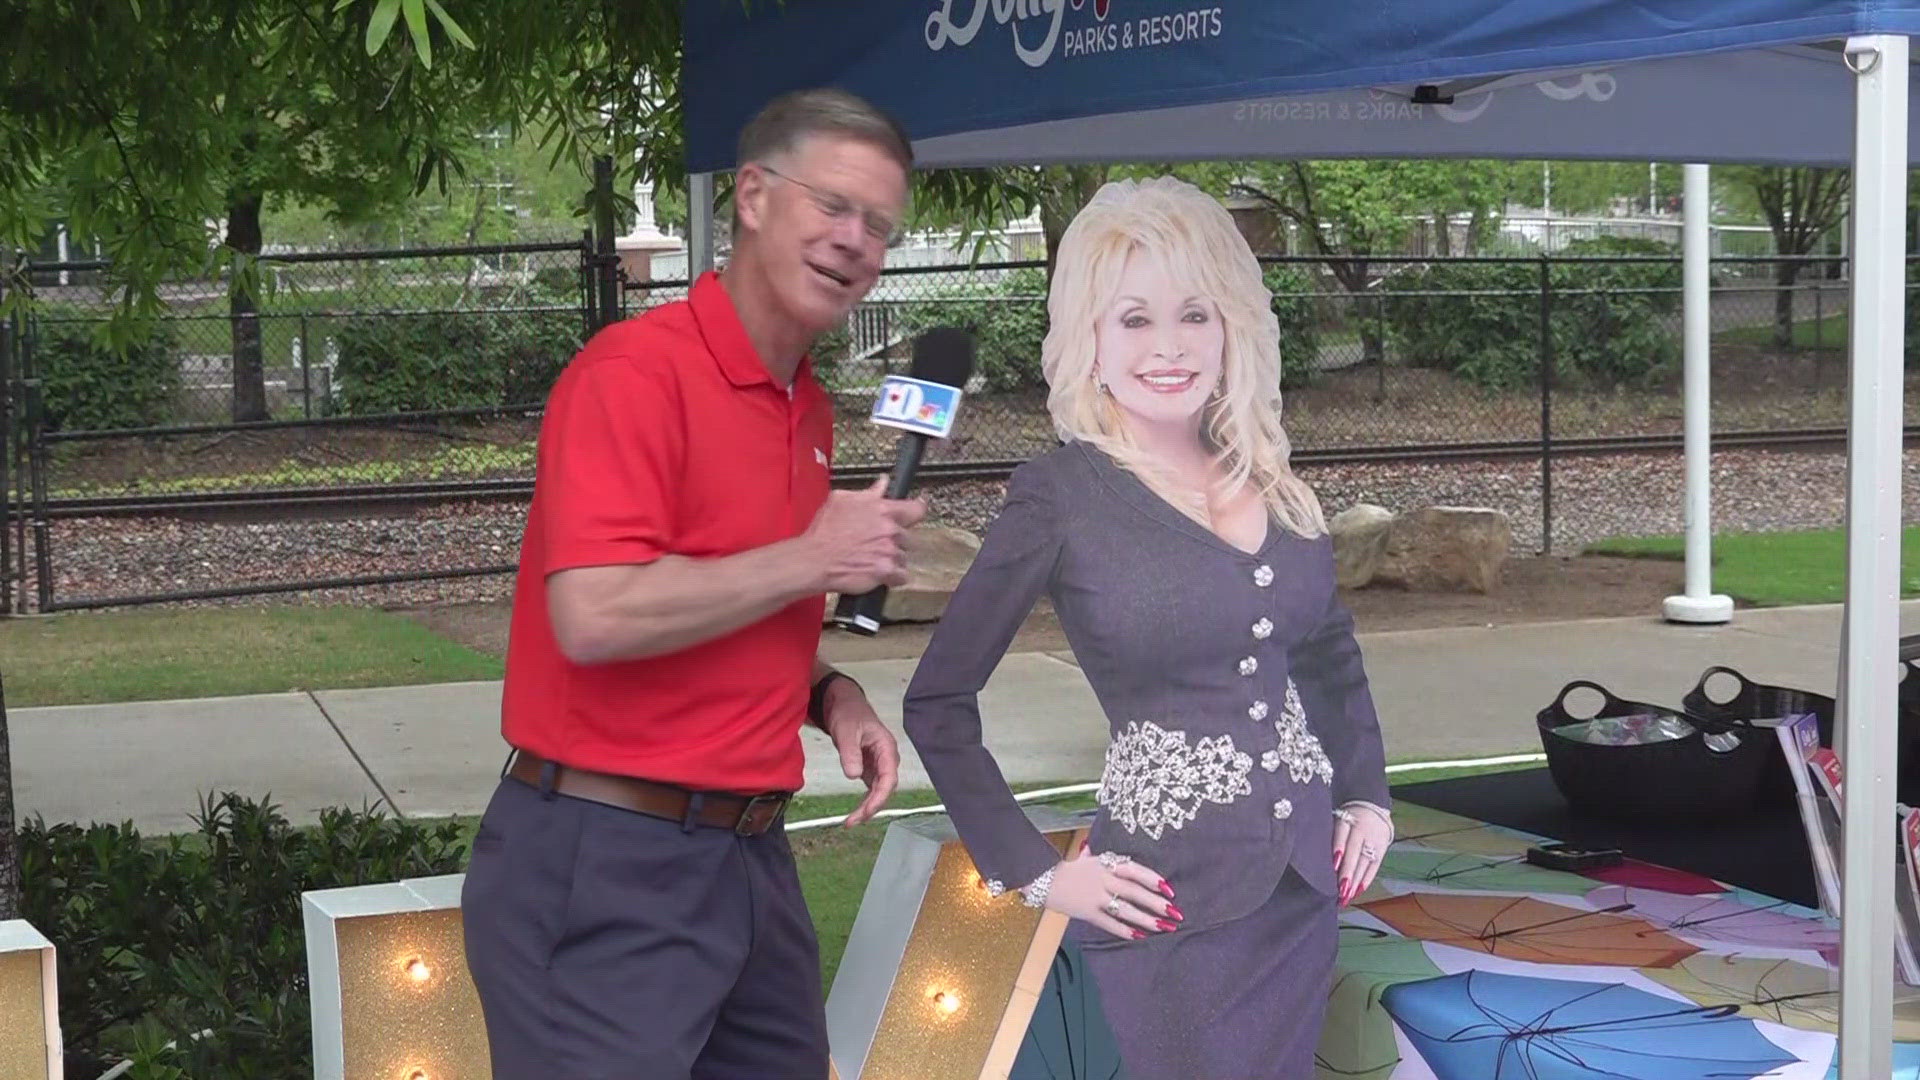 Todd Howell caught up with Dolly Parton at the Dogwood Arts Festival... at least the cardboard cutout version of her.